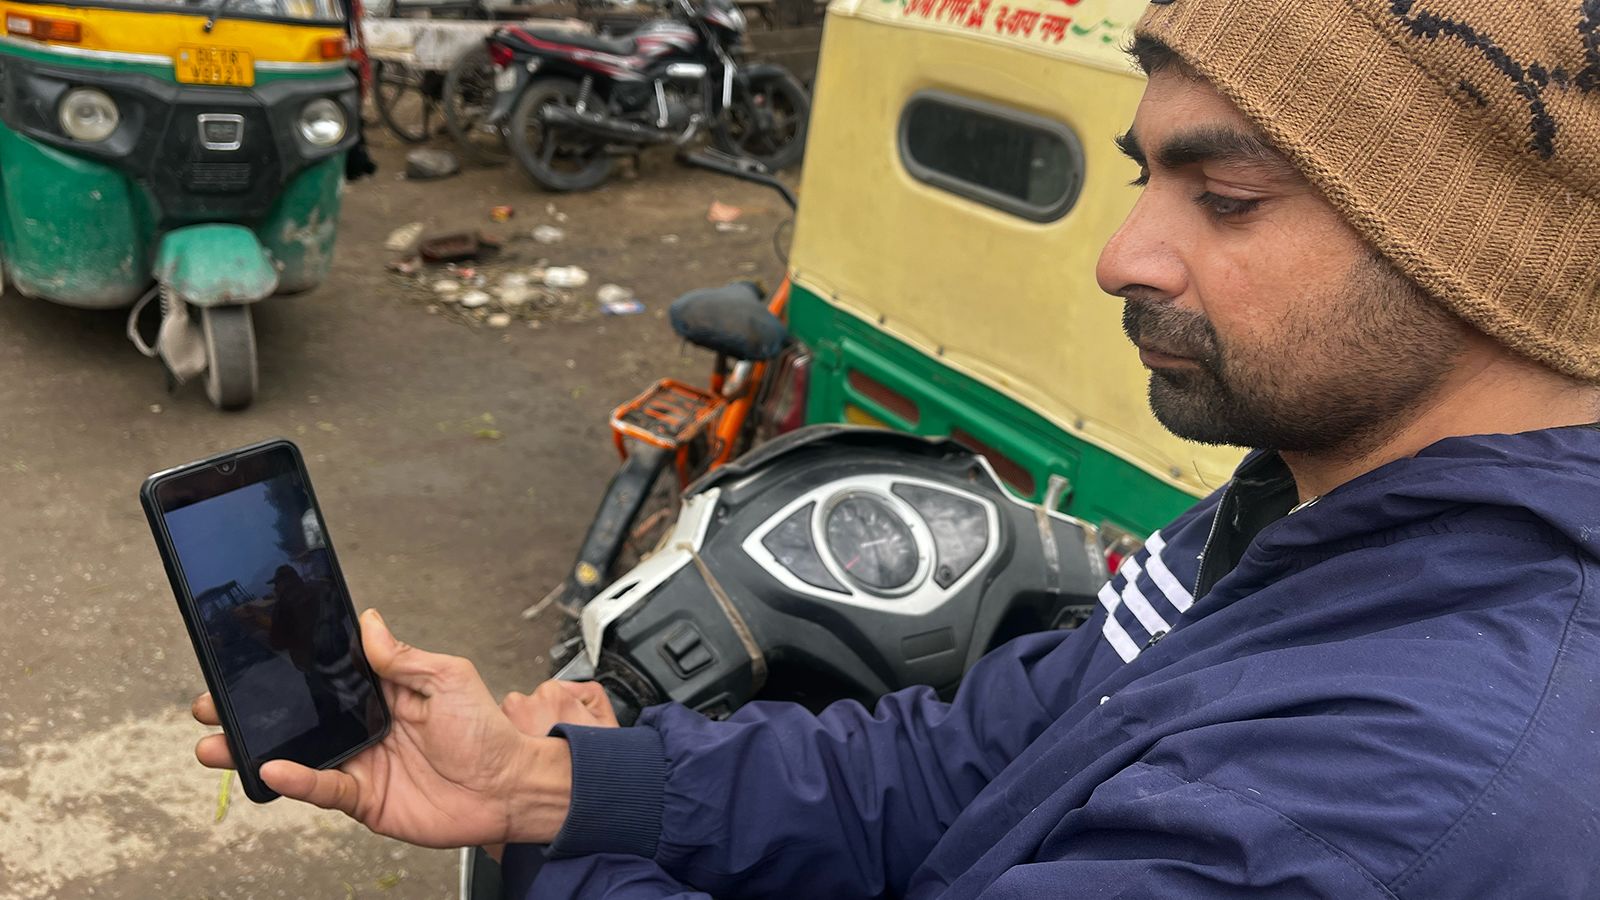 Mohammad Aman, a 32-year-old Salon worker from Delhi, looks at photos of the mosque demolition on his phone.